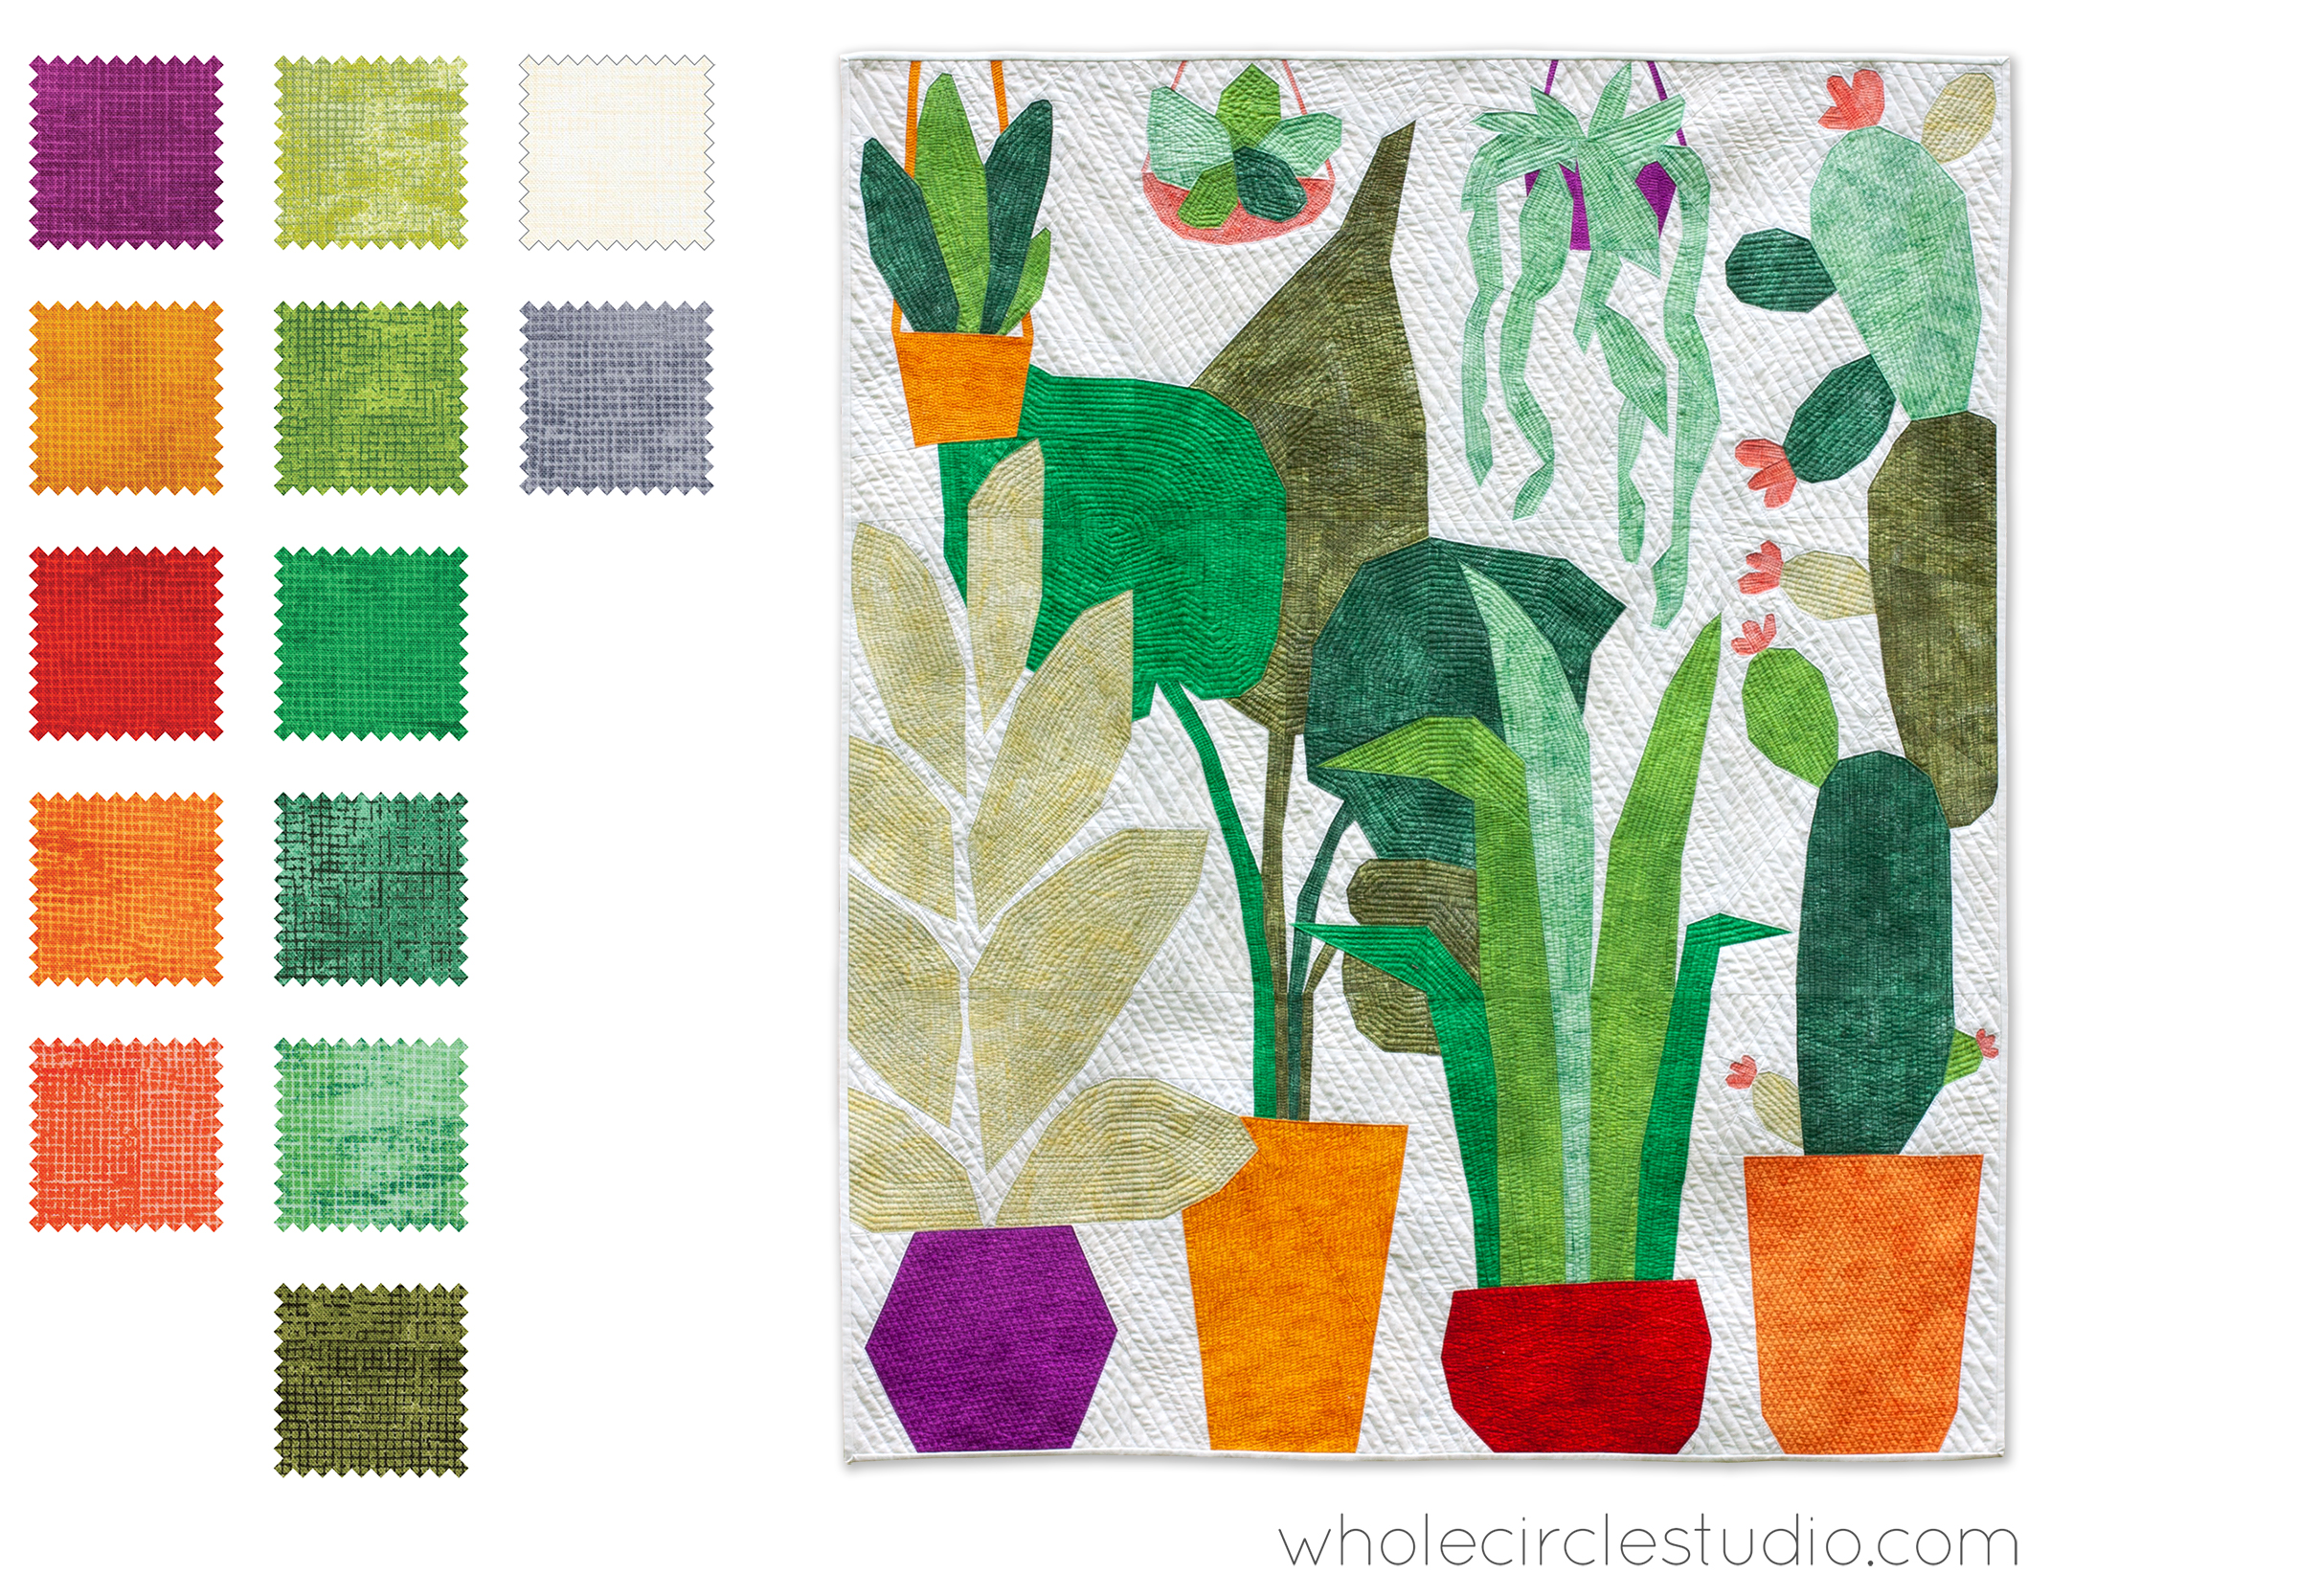 fabric swatches and illustration of Cactus and potted plants in a window.